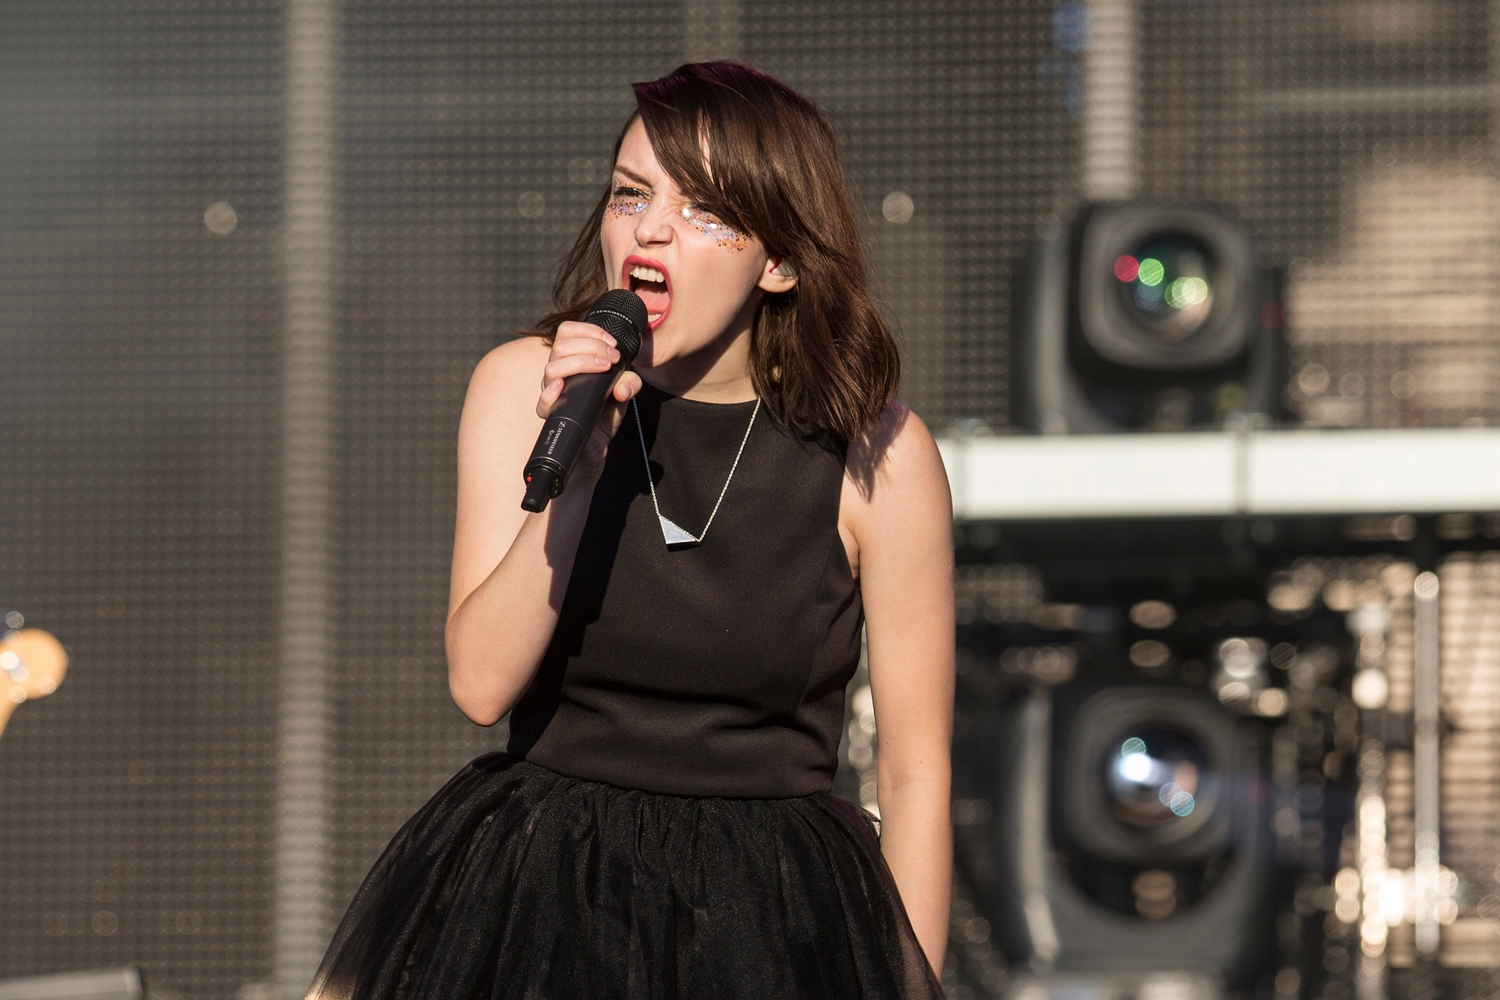 "RIP Harambe" - Chvrches offer thumping Reading 2016 set